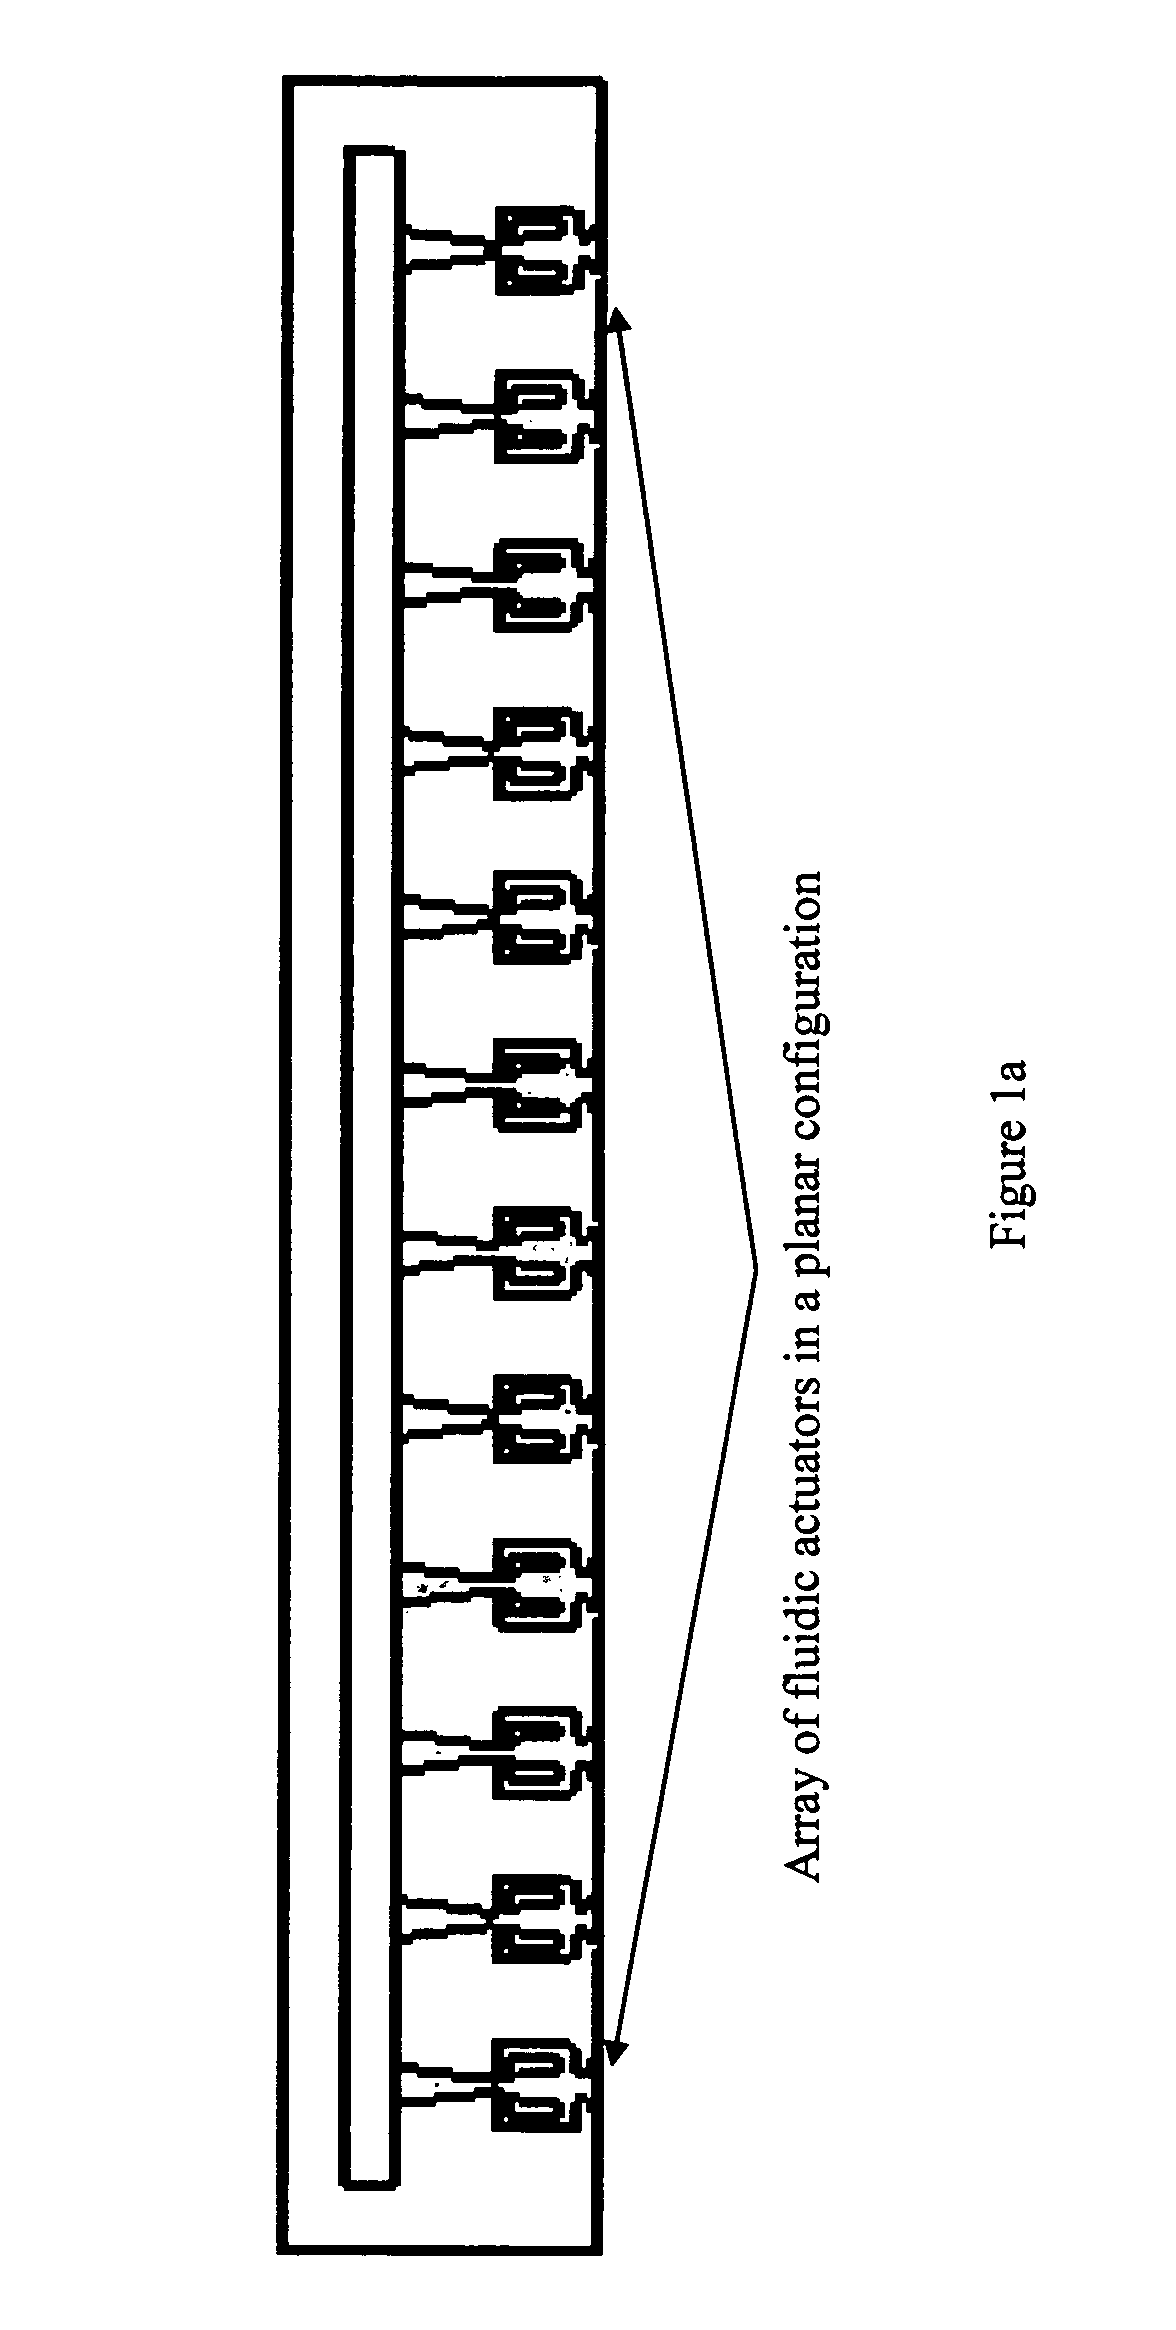 Method and apparatus for aerodynamic flow control using compact high-frequency fluidic actuator arrays